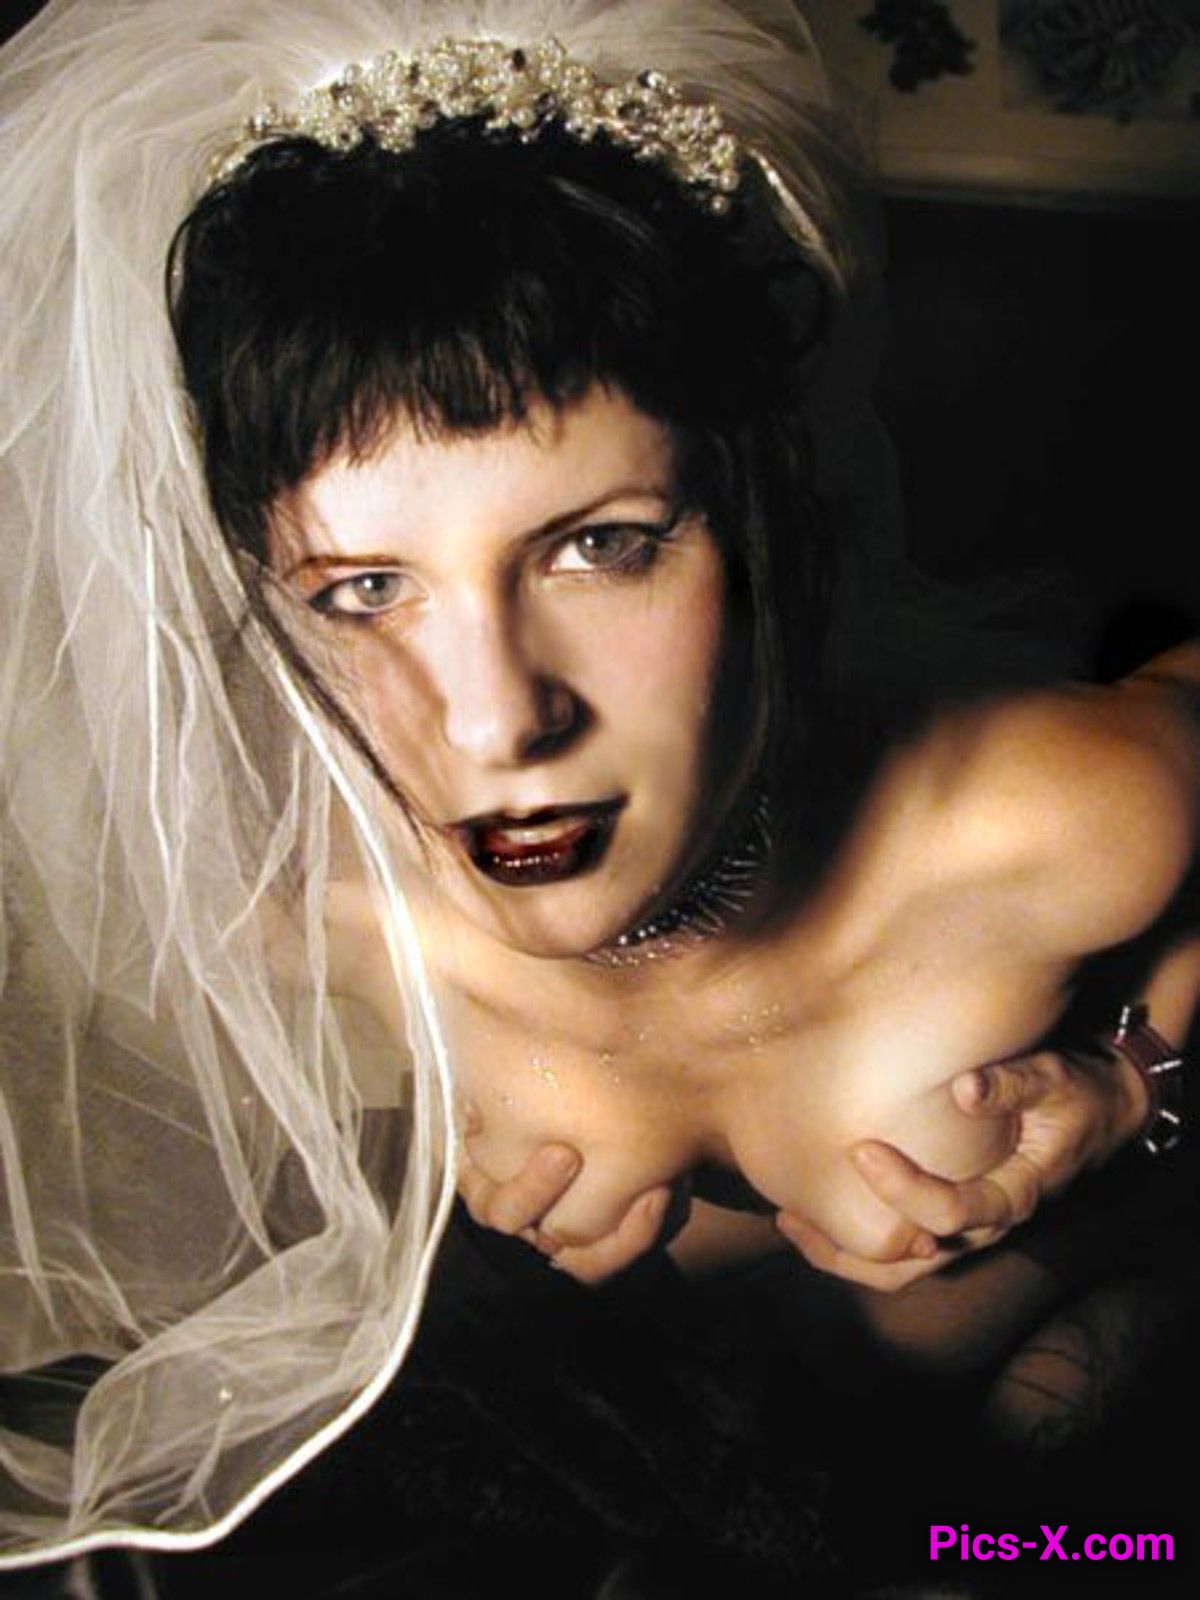 Gothic bride showing off her sexy body in some arty shots - Punk Rock Girlfriend - Image 12